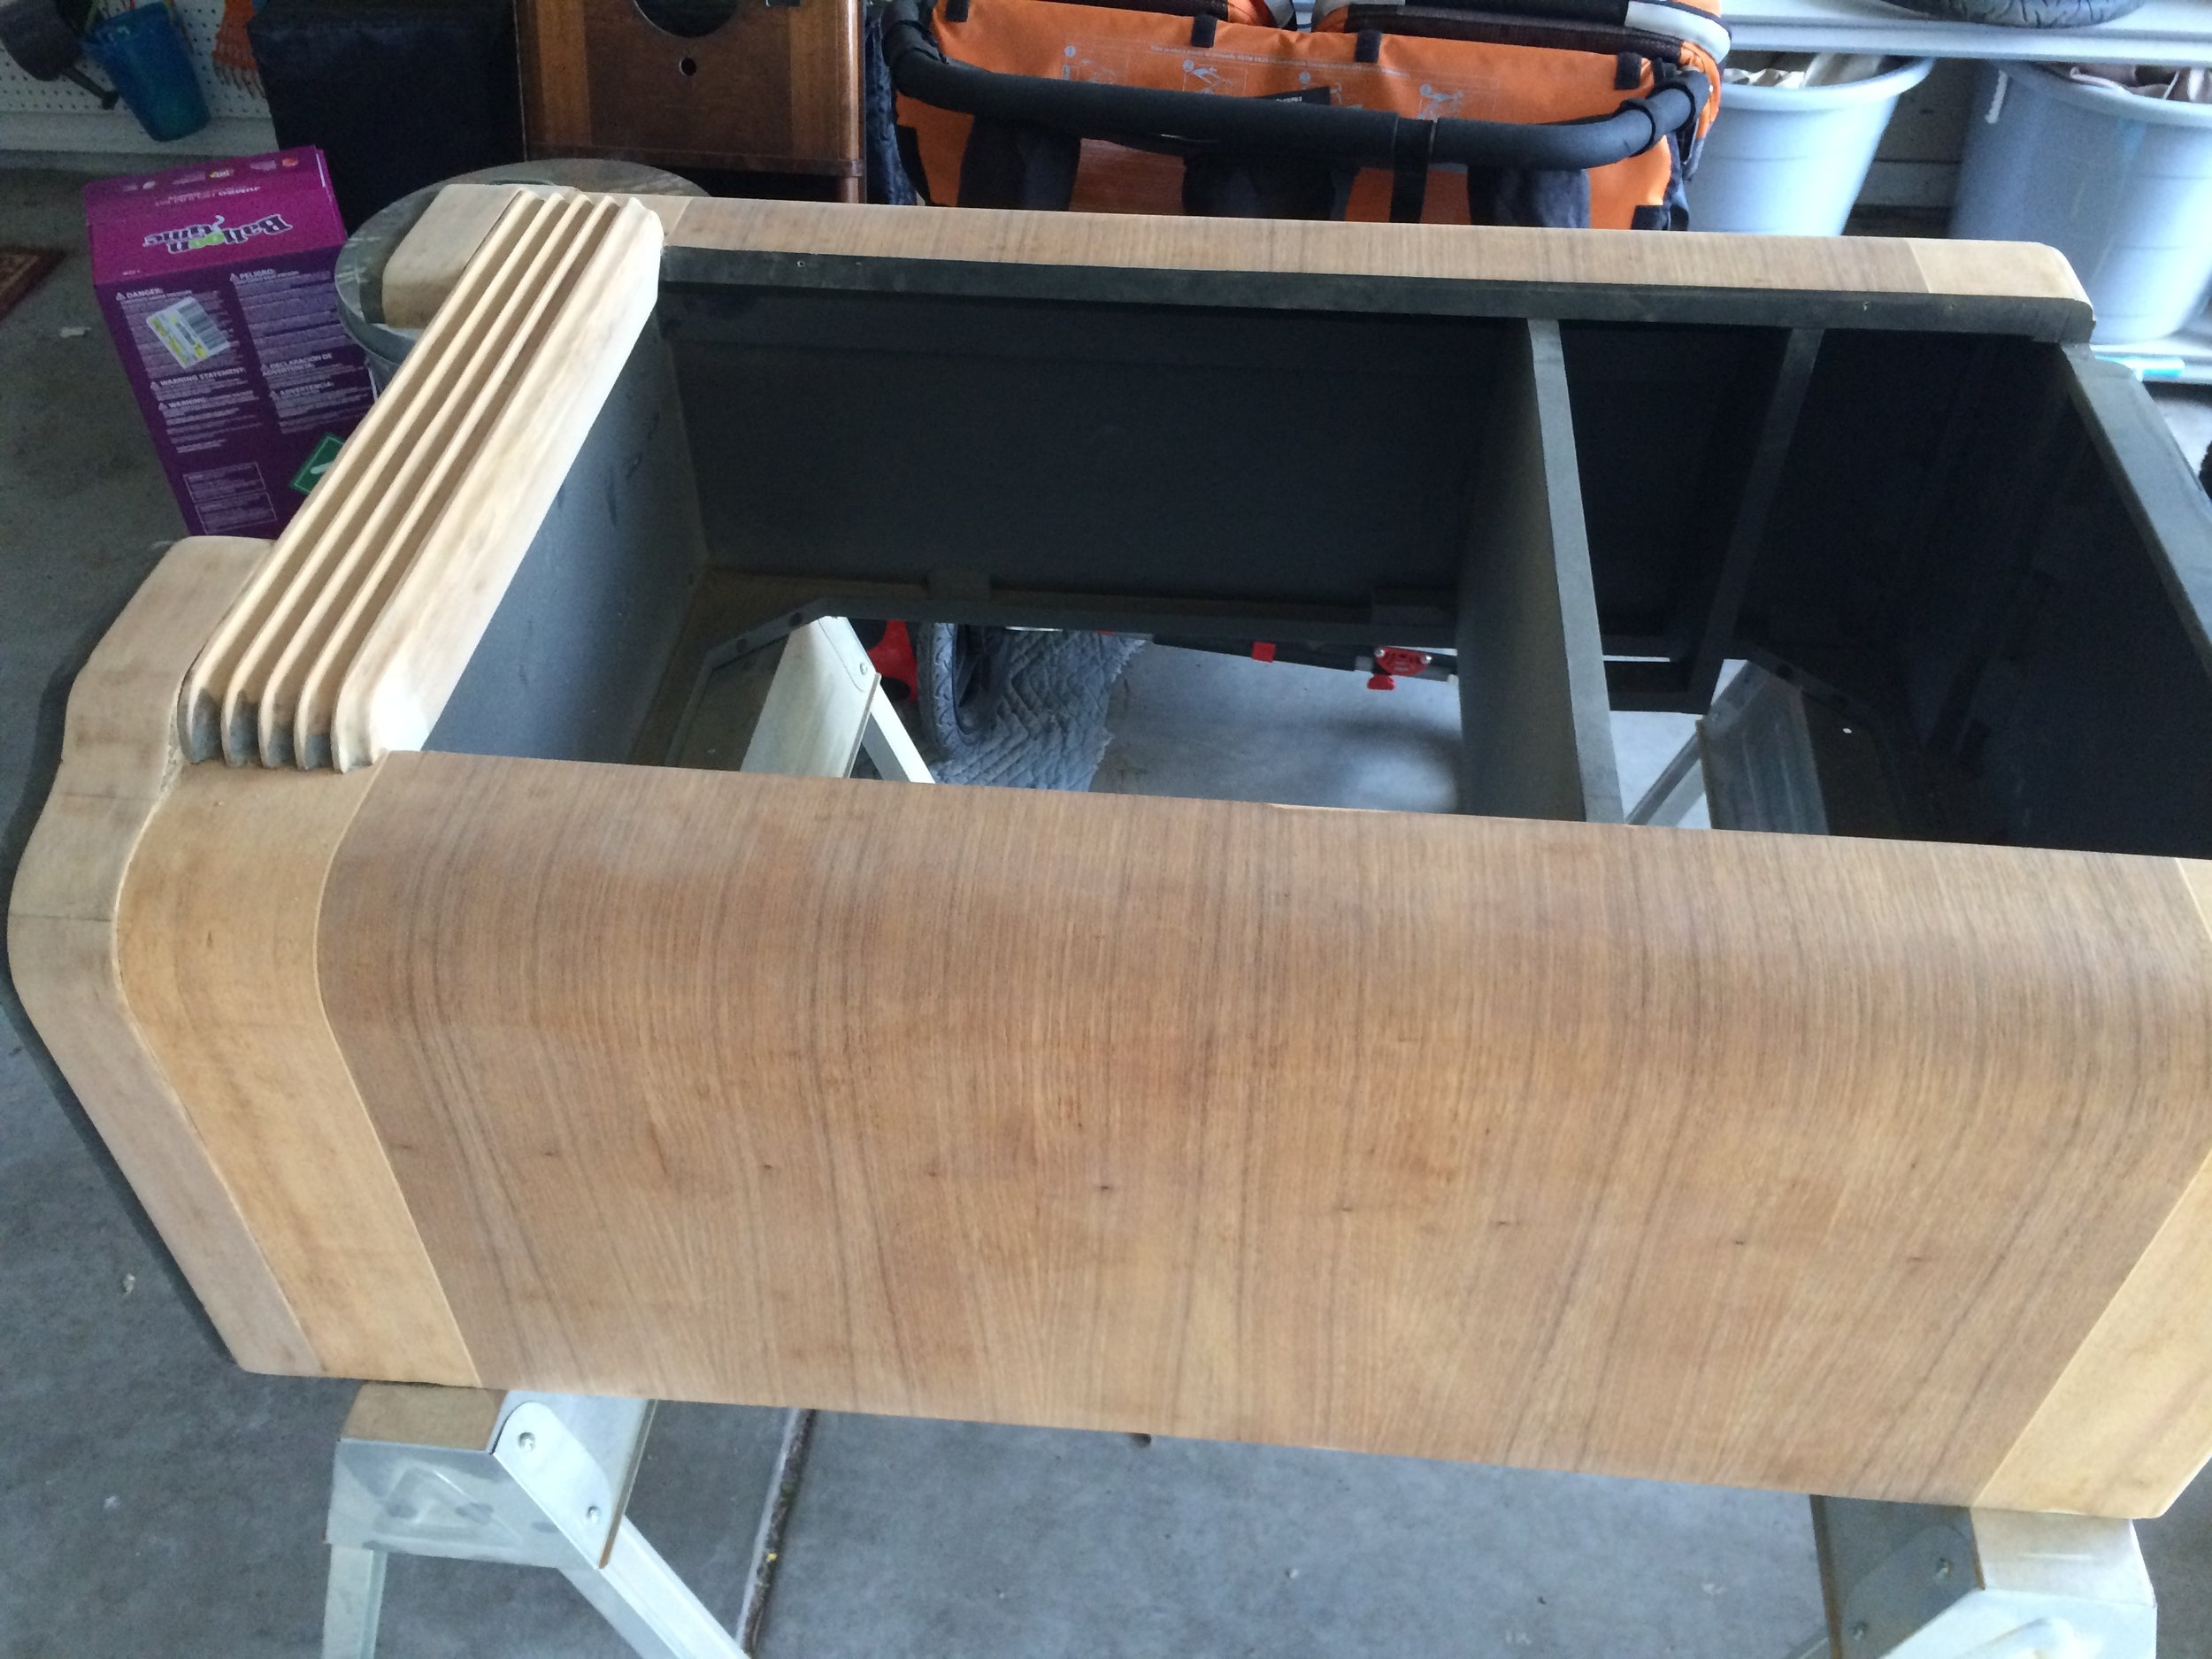 The sanded cabinet